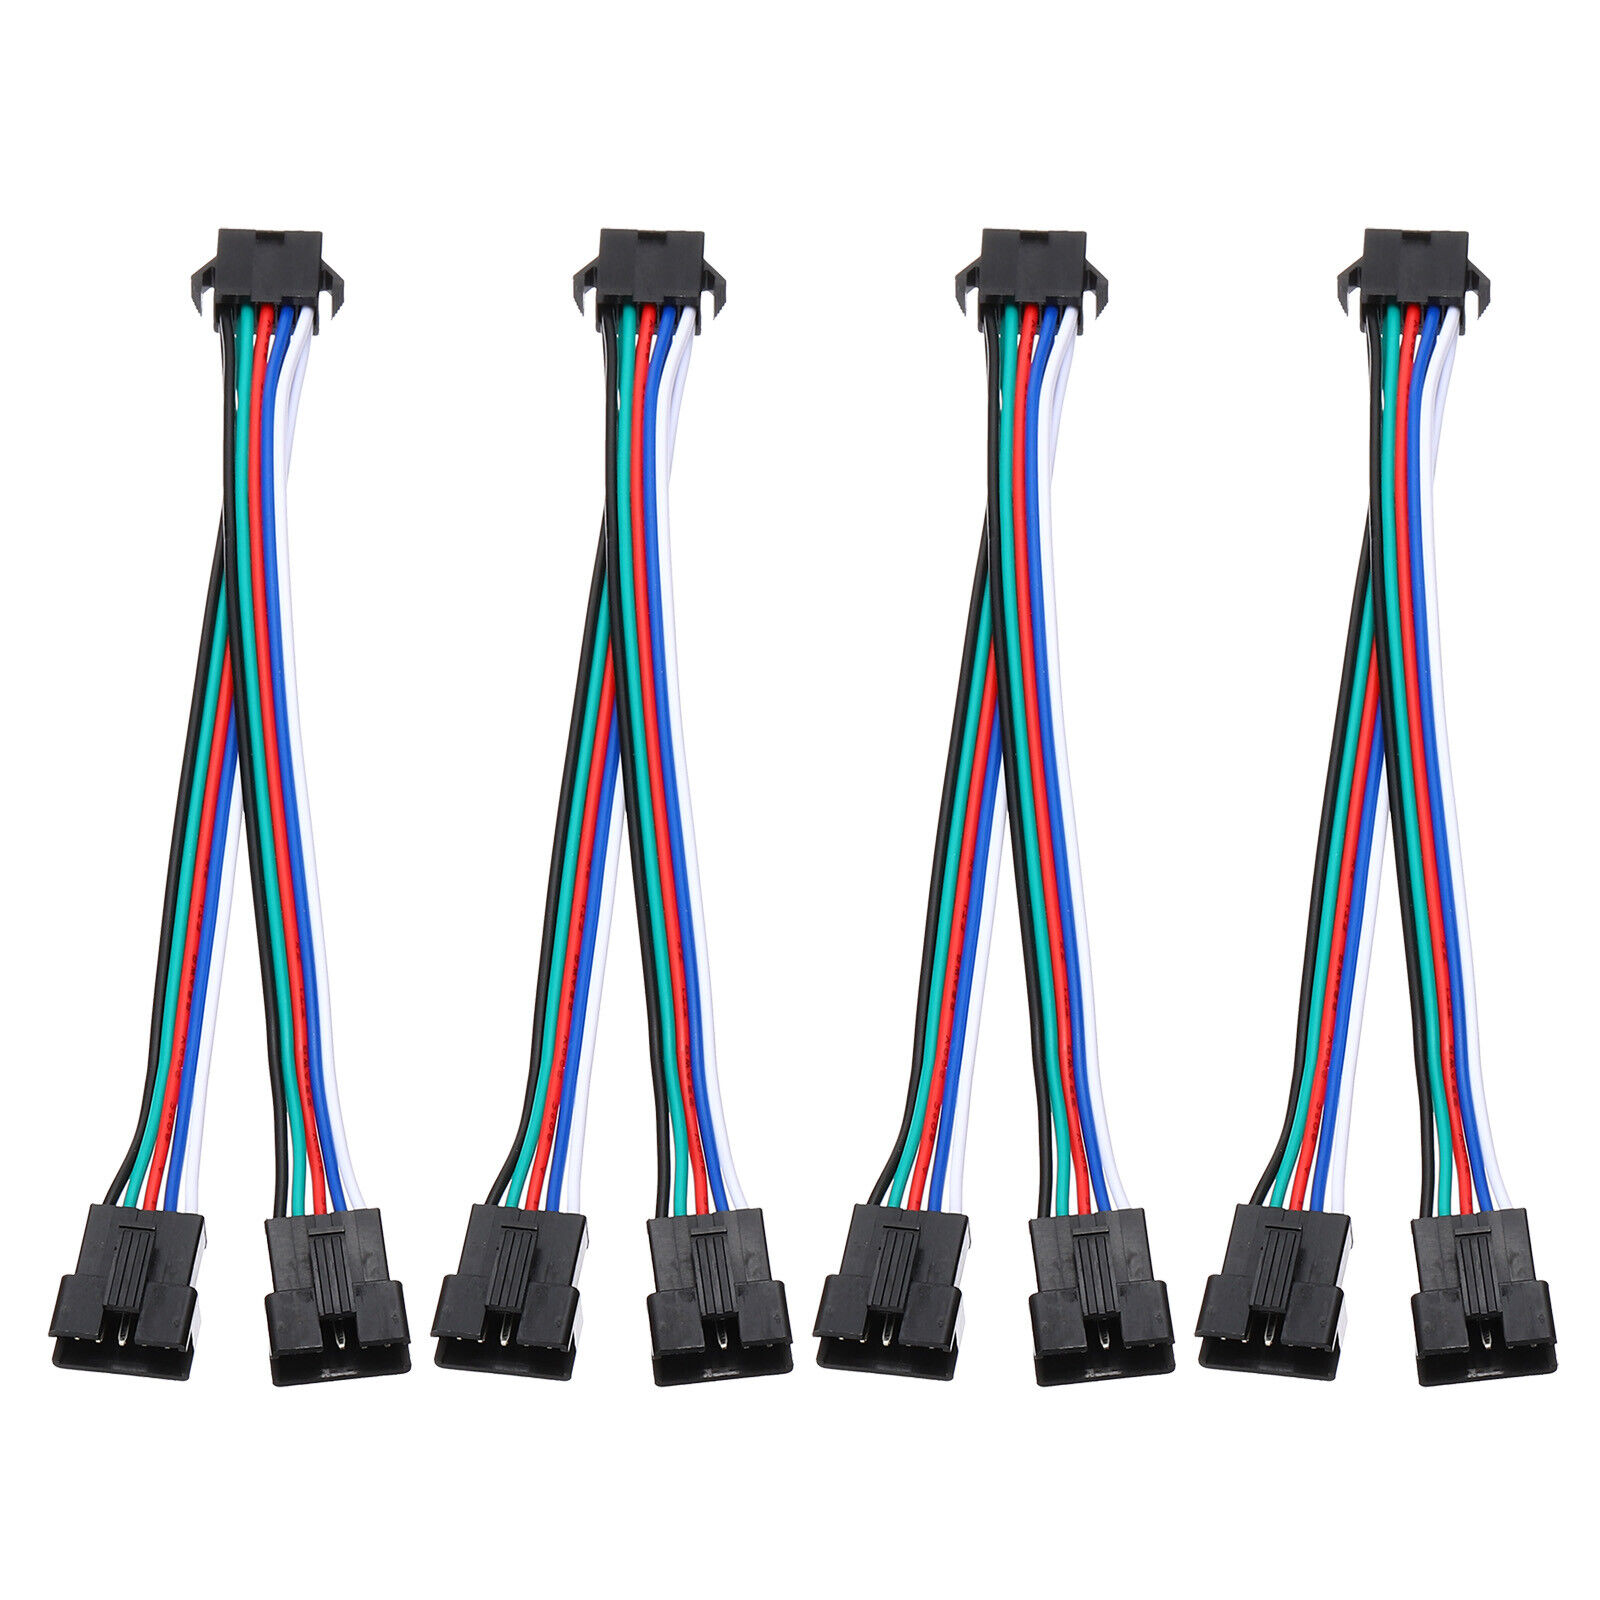 ARGB Splitter Cable, 4 Pcs Fan RGB Extension Power Cord with 5Pin Splitter Cable